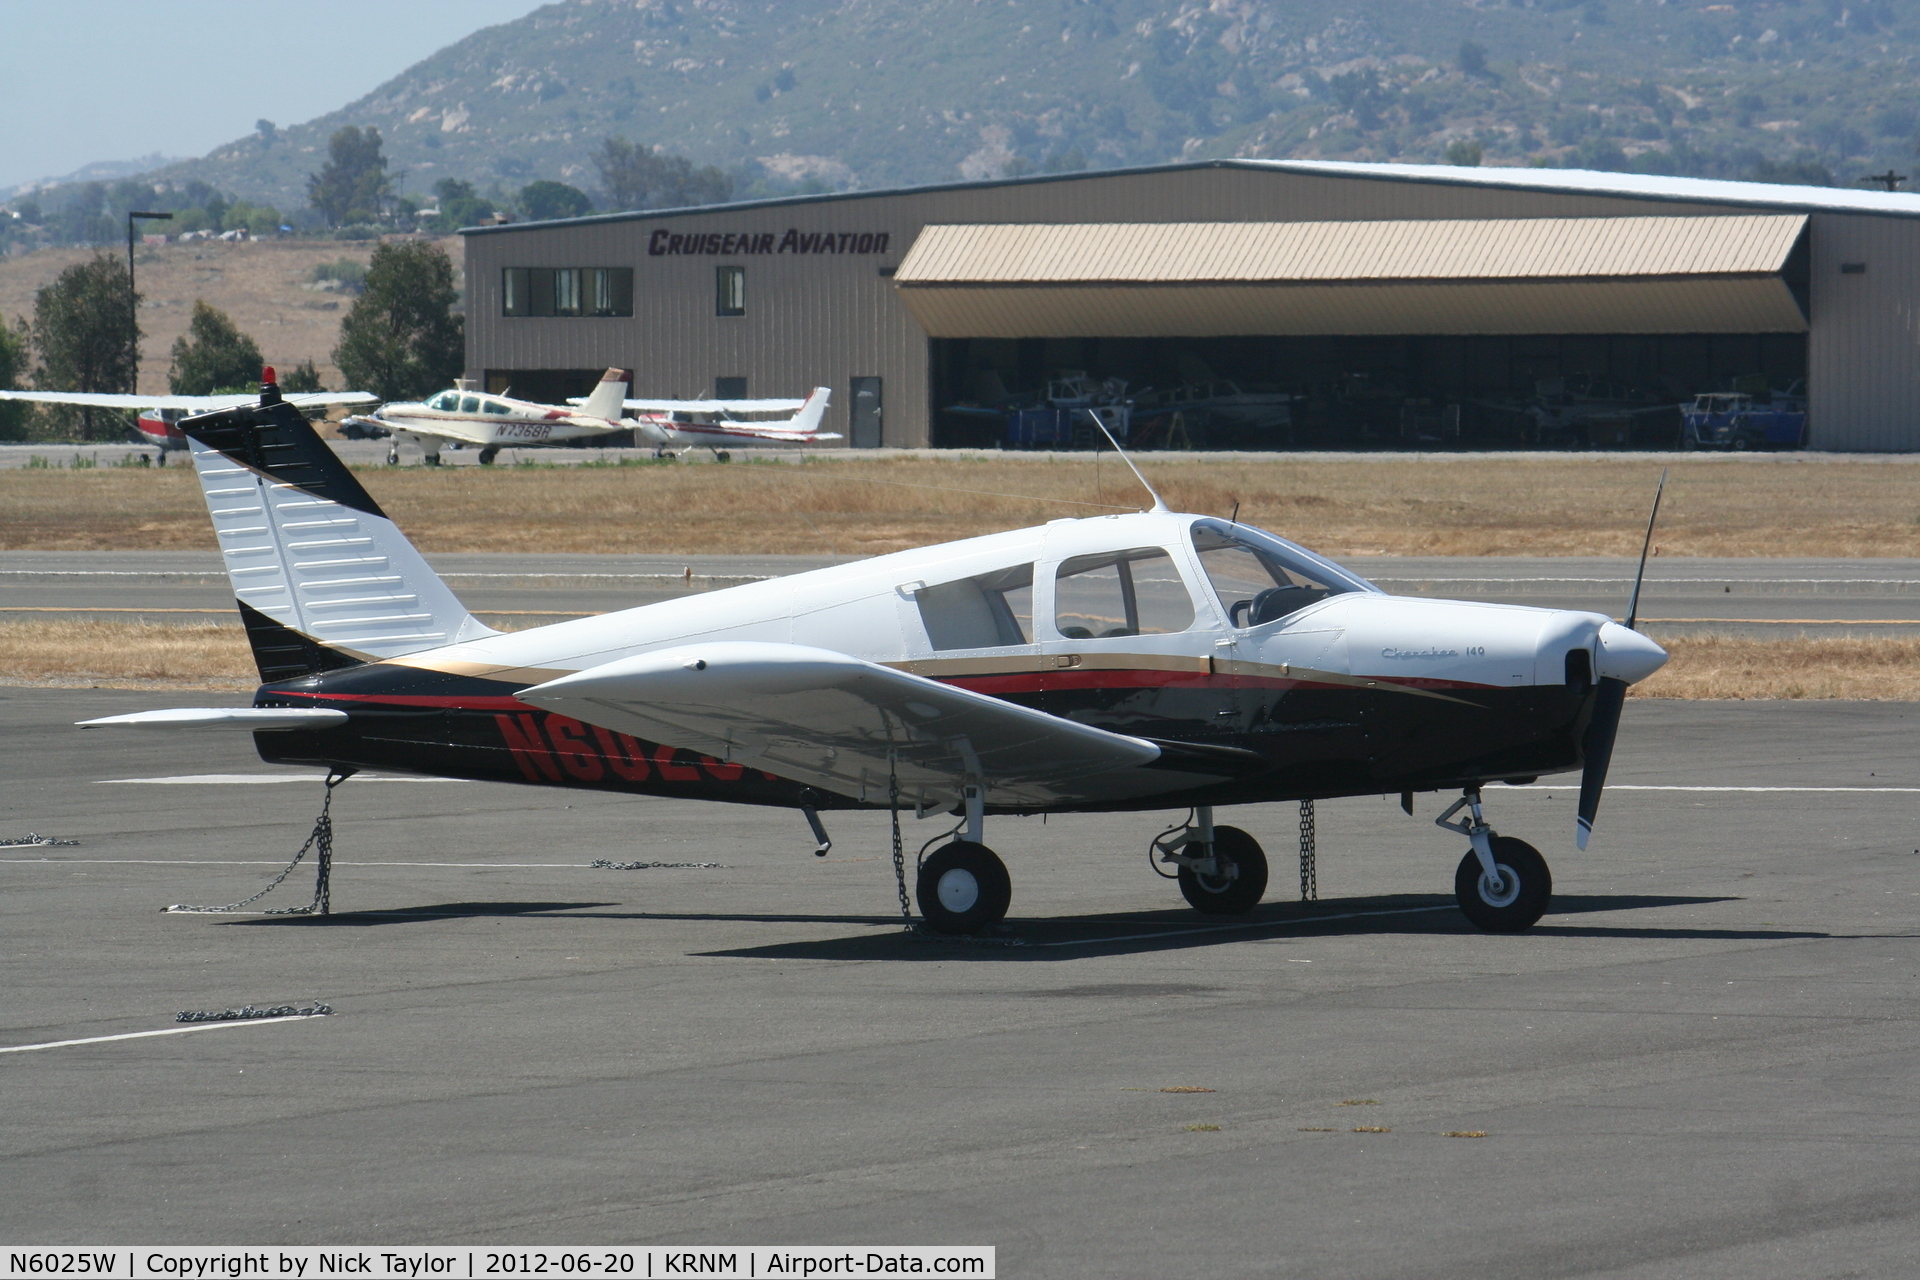 N6025W, 1964 Piper PA-28-140 C/N 28-20025, Parked on the tarmac